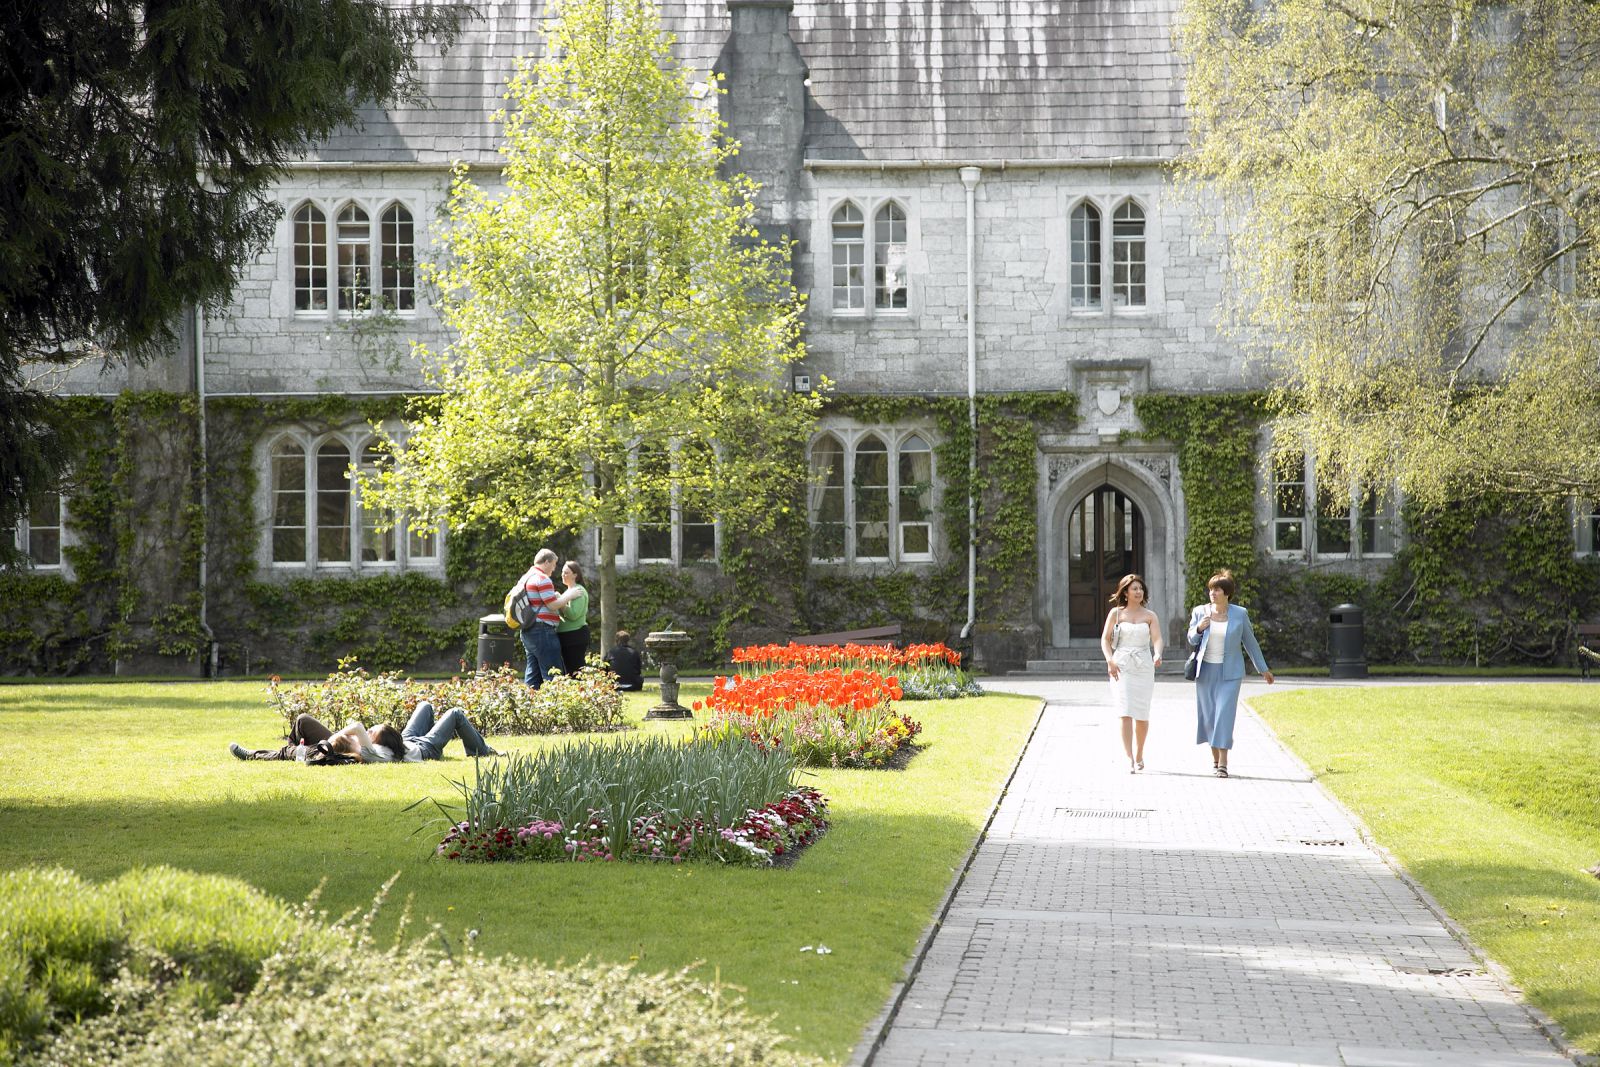 ACE at UCC are offering free or heavily subsidised places to those seeking to upskill or reskill under the Government's new Modular Skills Provision initiative. Fees are subsidised by 90-100%.